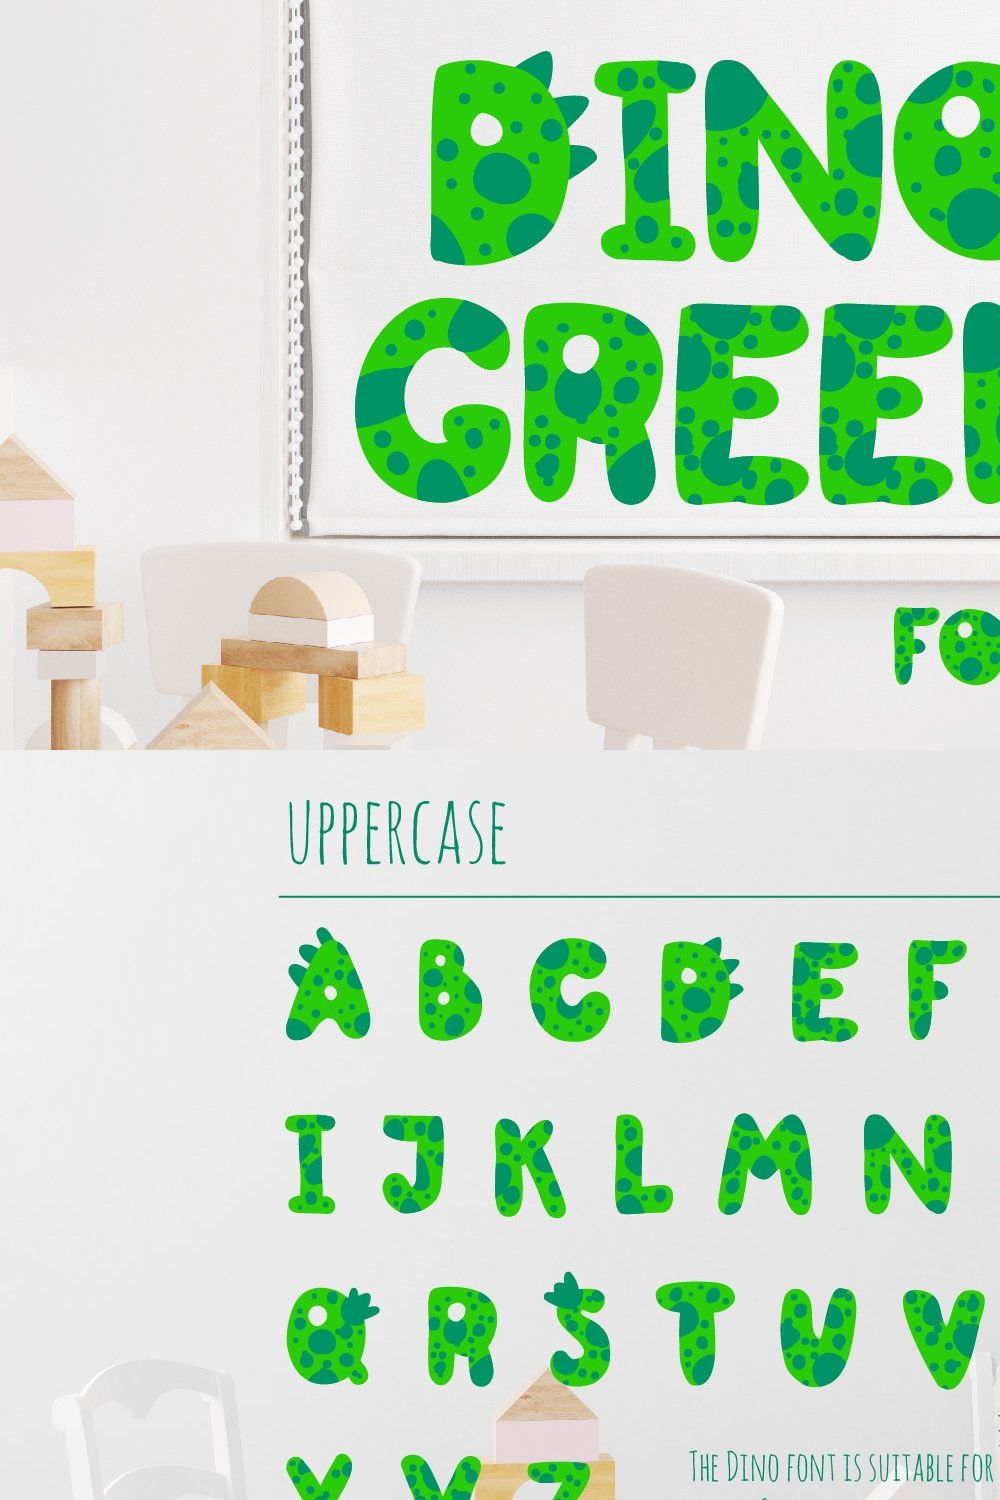 Dino green Font. Color cute dinosaur pinterest preview image.